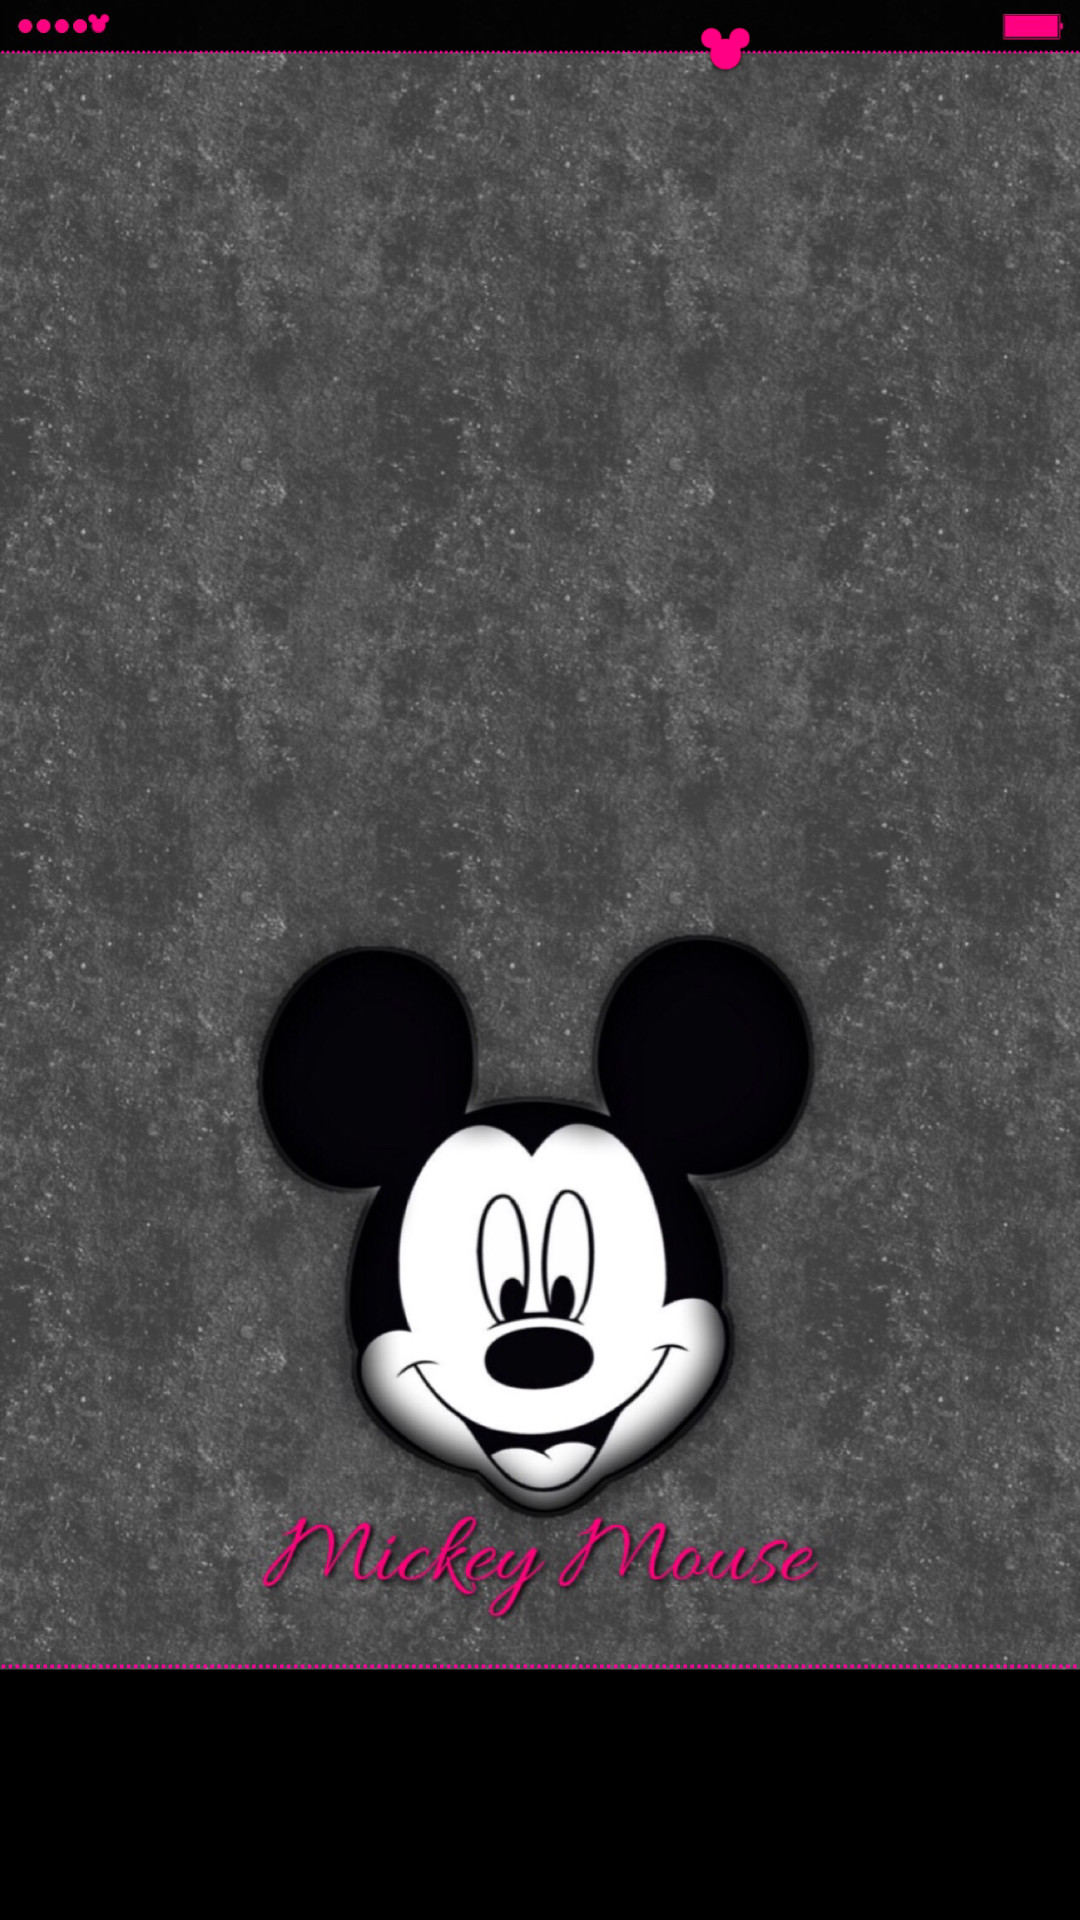 1080x1920 mickey mouse wallpaper iphone 6 plus #1154015